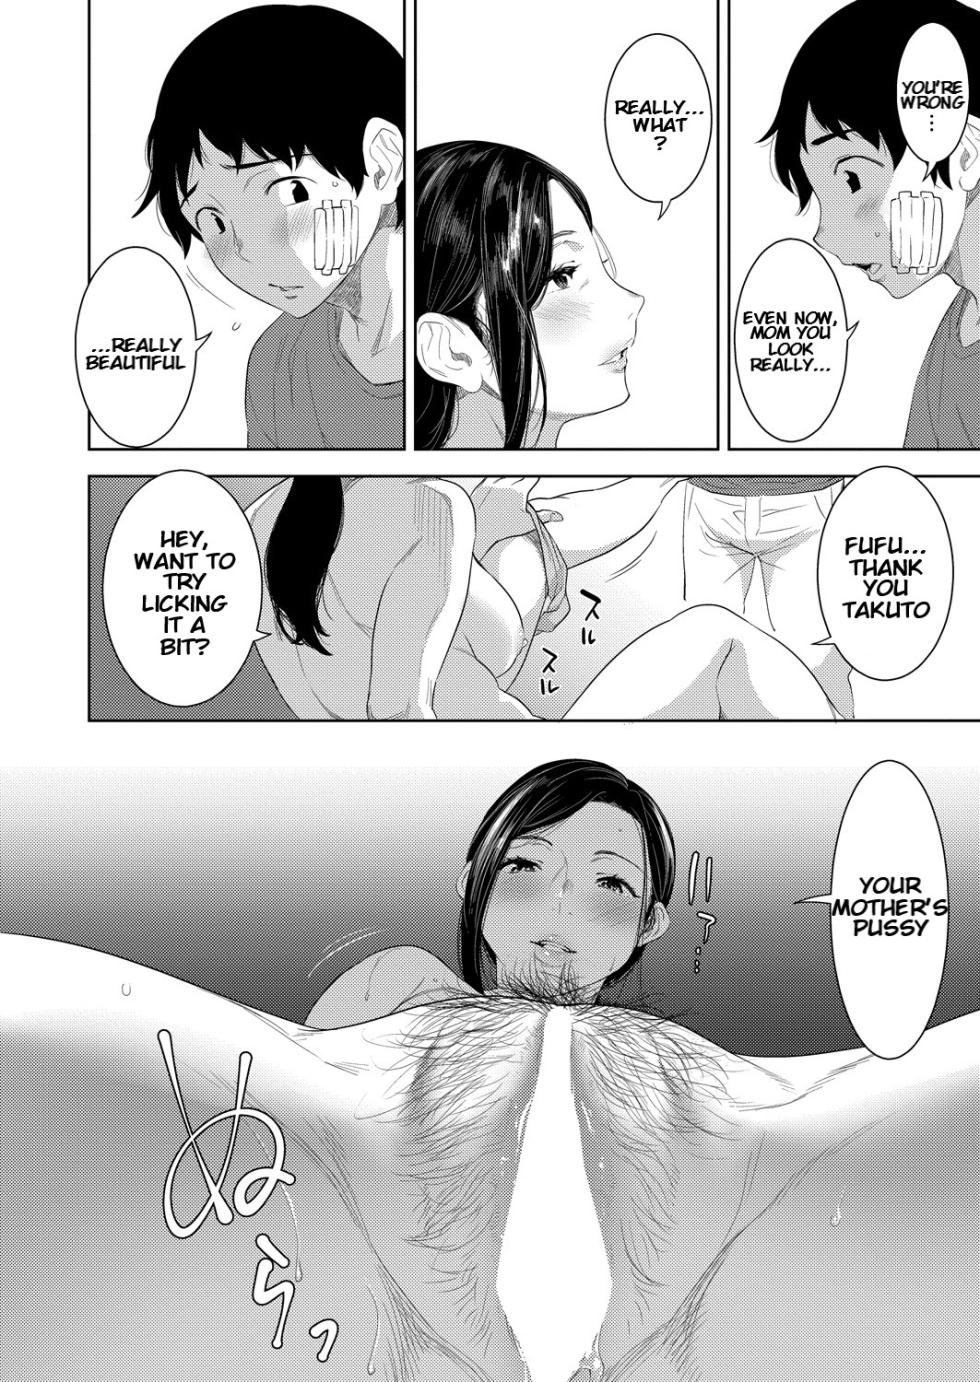 [Nme] Haha no Umare (Comic Reboot Vol.39) Mother's Ripeness [KenGotTheLexGs] (English) - Page 20